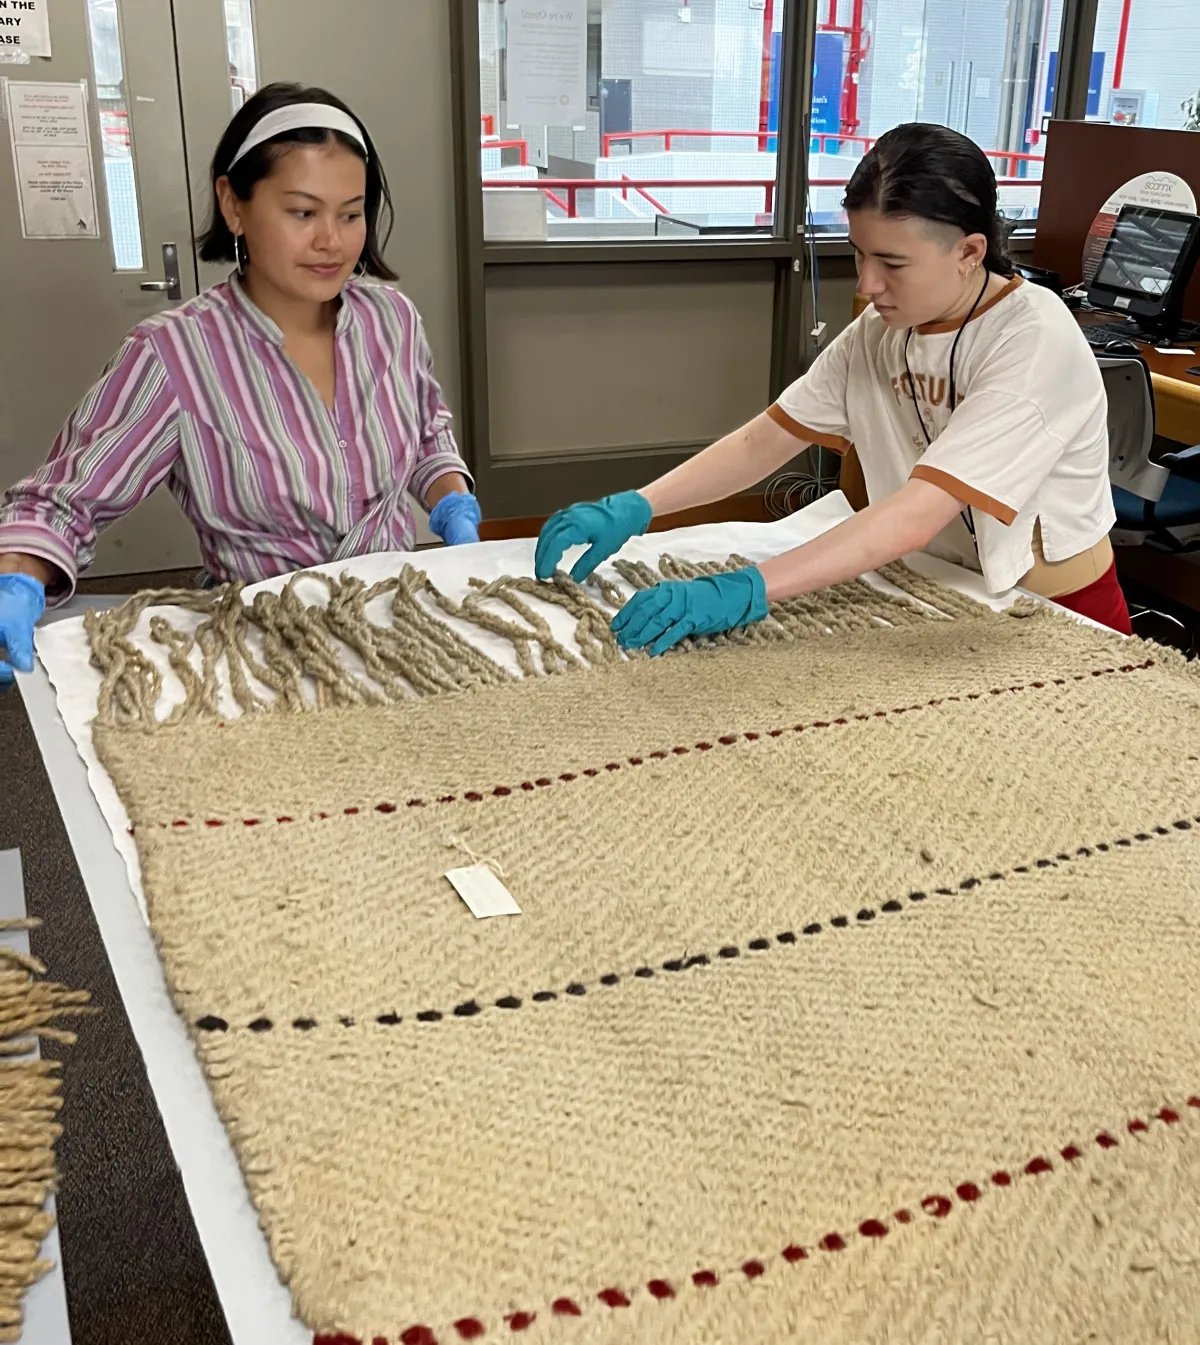 Two SIMA Collections Interns, standing at a table and looking at a large handwoven textile. Both are wearing gloves. One is straightening the fringe on the textile. 